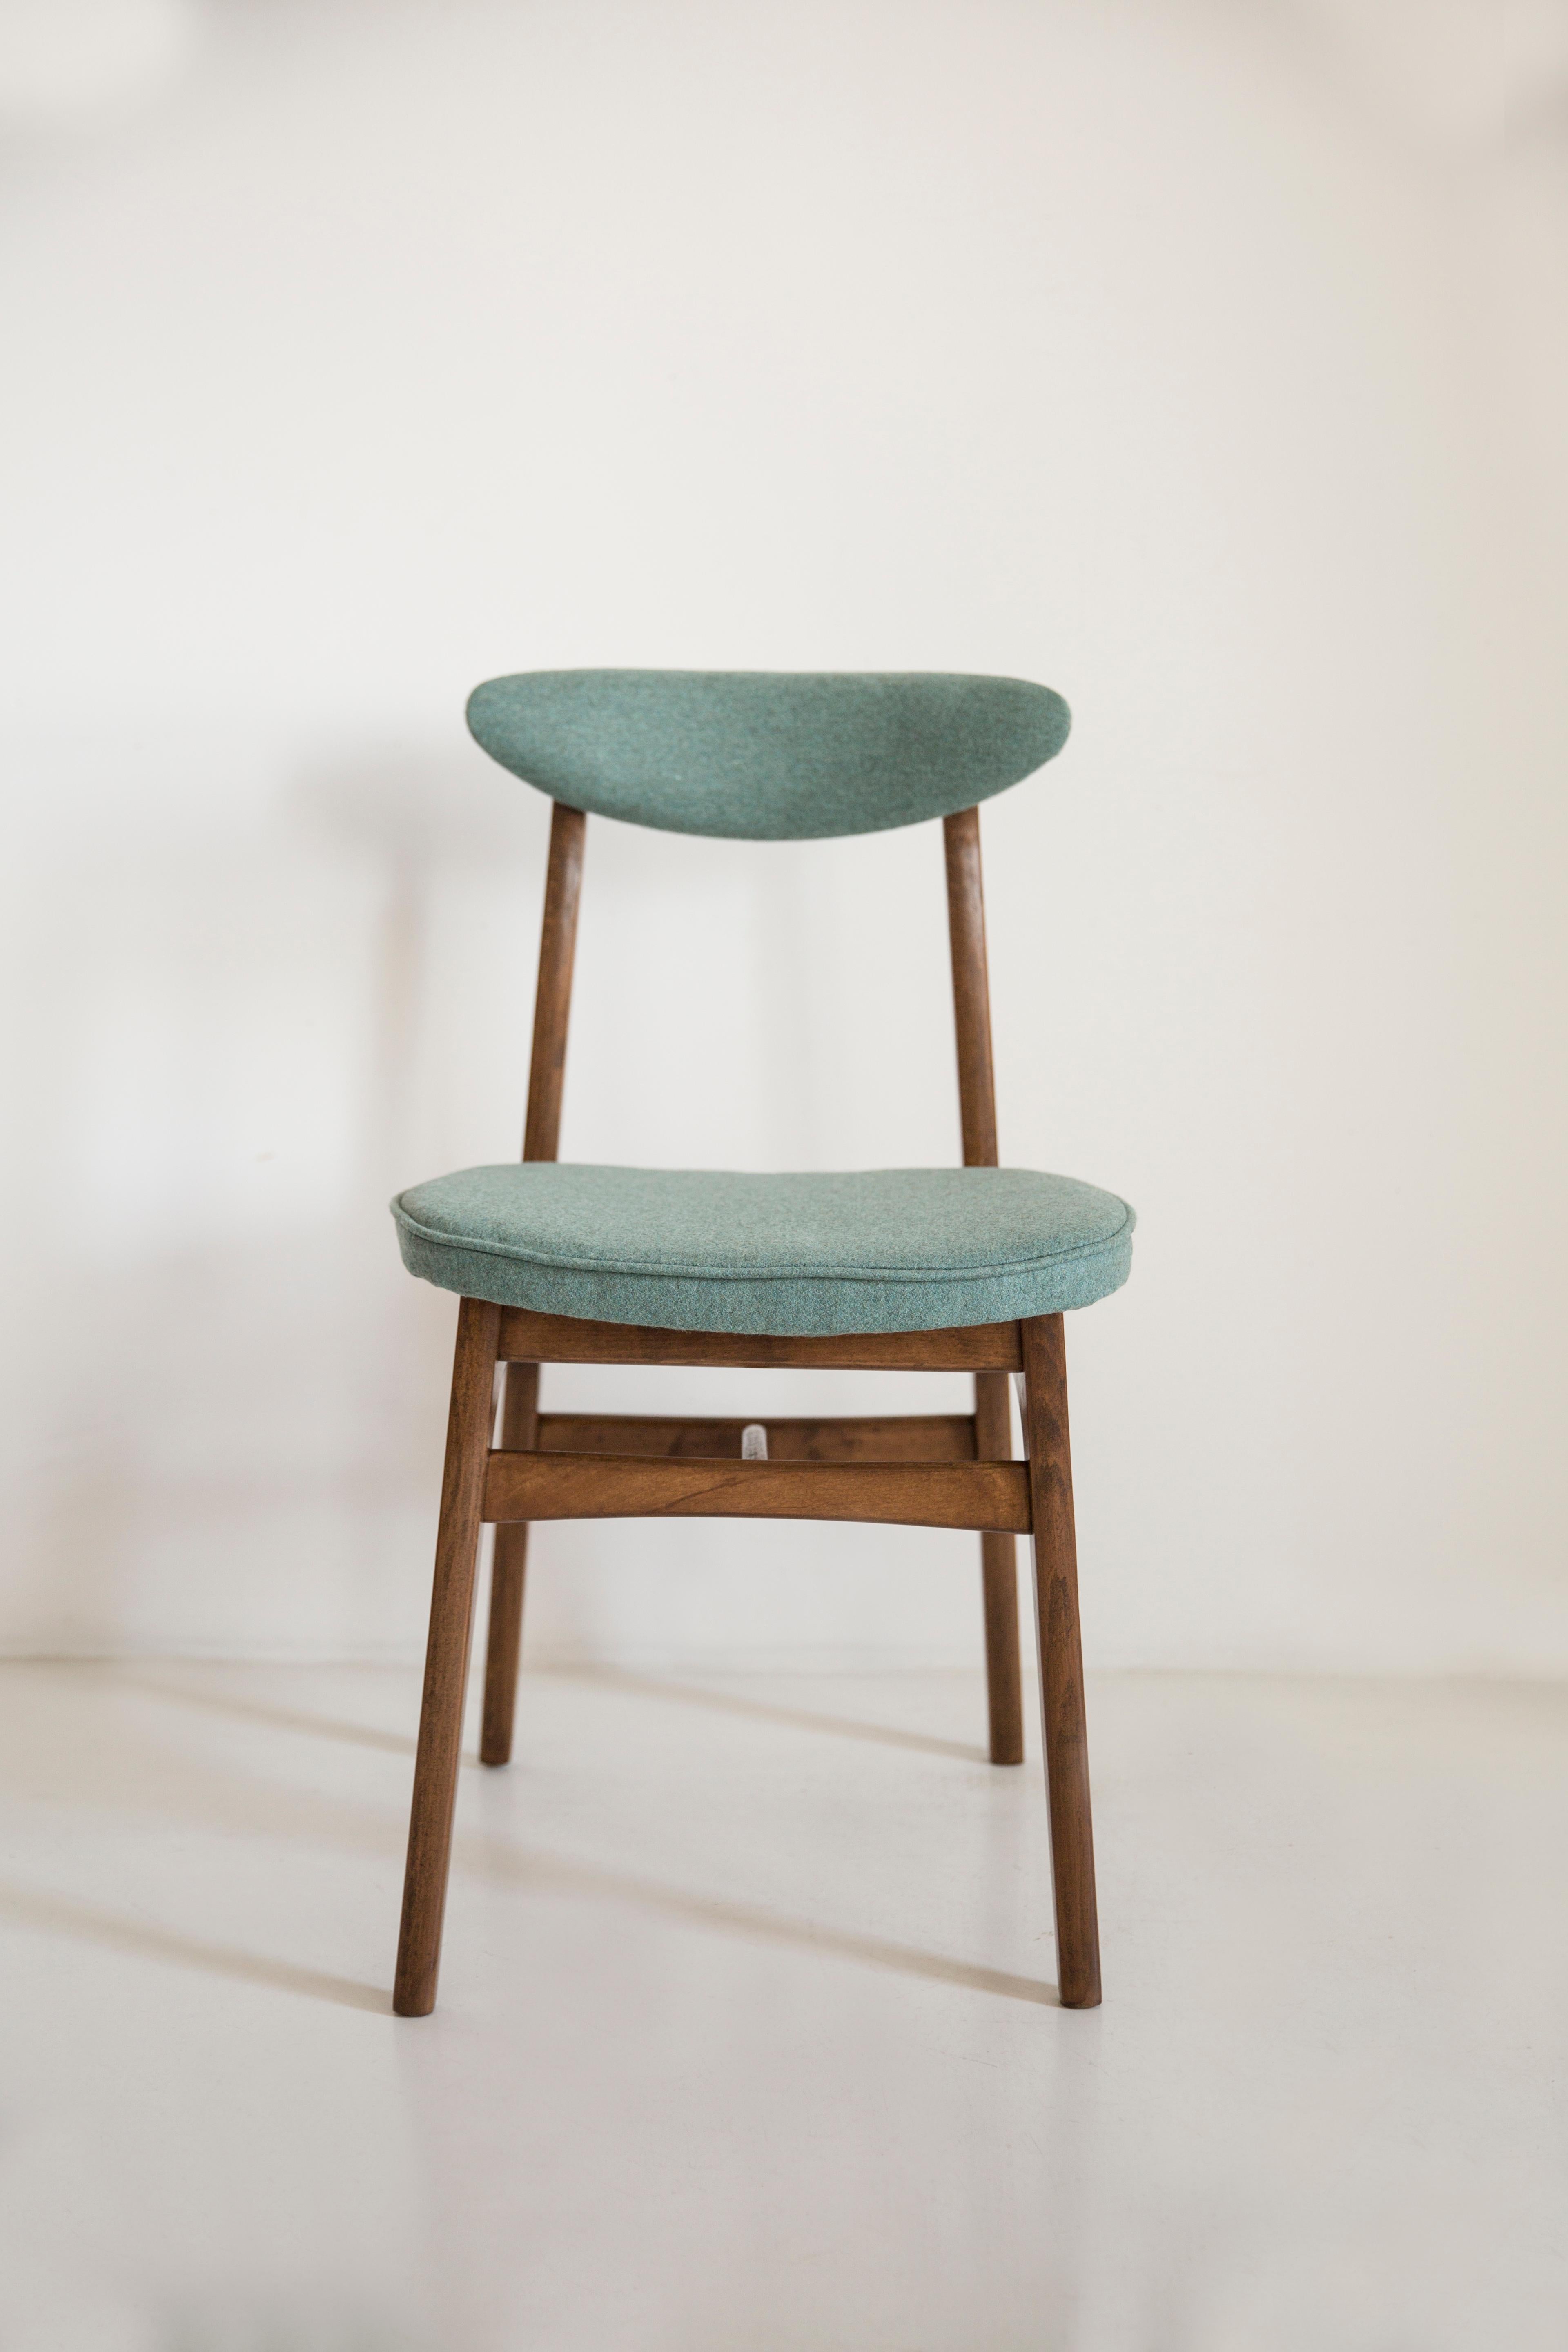 Chair designed by Prof. Rajmund Halas. Made of beechwood. Chair is after a complete upholstery renovation, the woodwork has been refreshed. Seat is dressed in green velvet, durable and pleasant to the touch fabric. Chair is stable and very shapely.